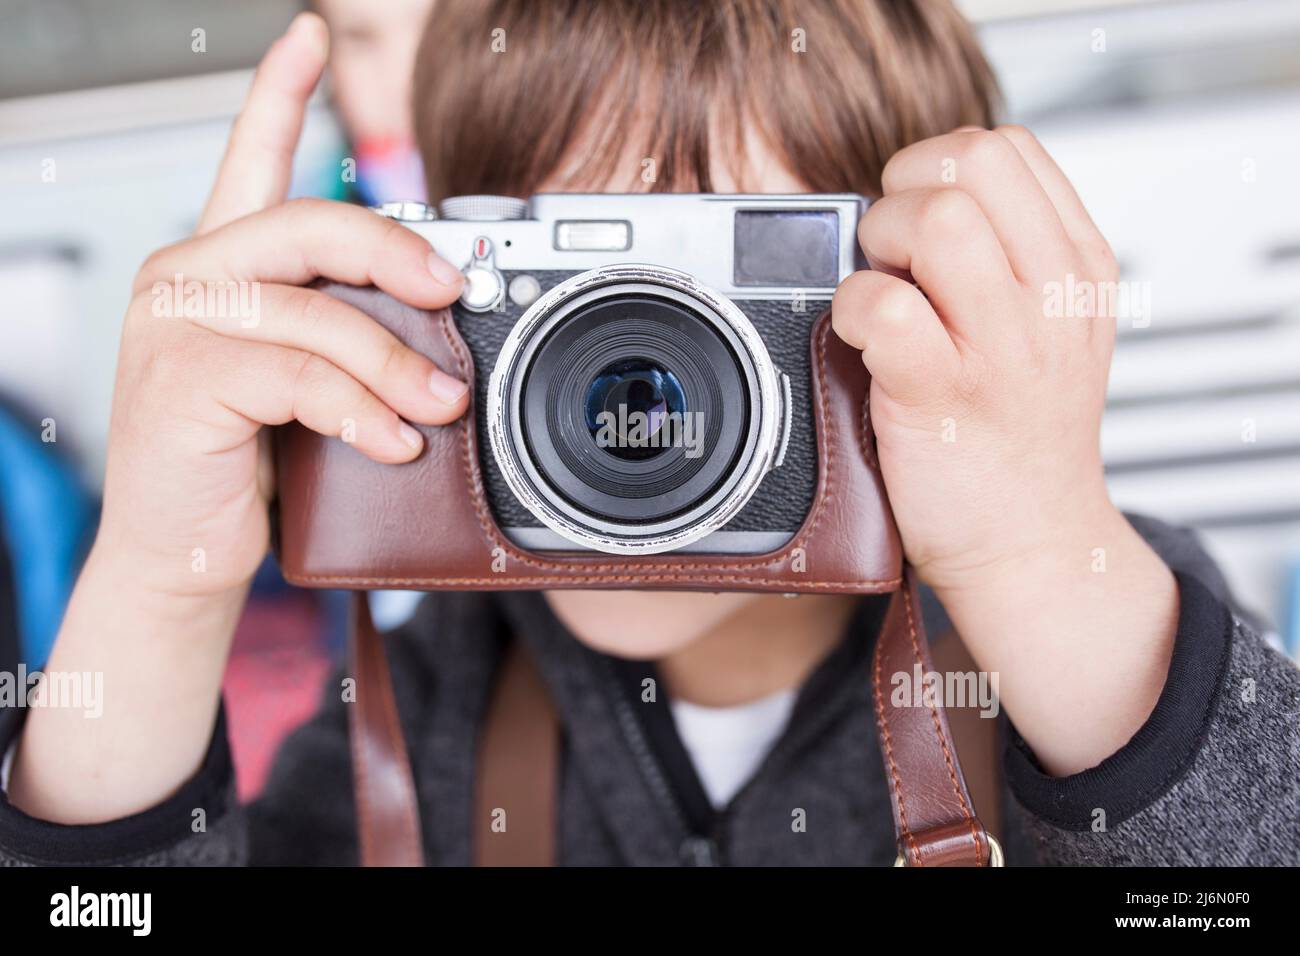 Child boy taking pictures with retro camera. He is about to press the shutter. Stock Photo